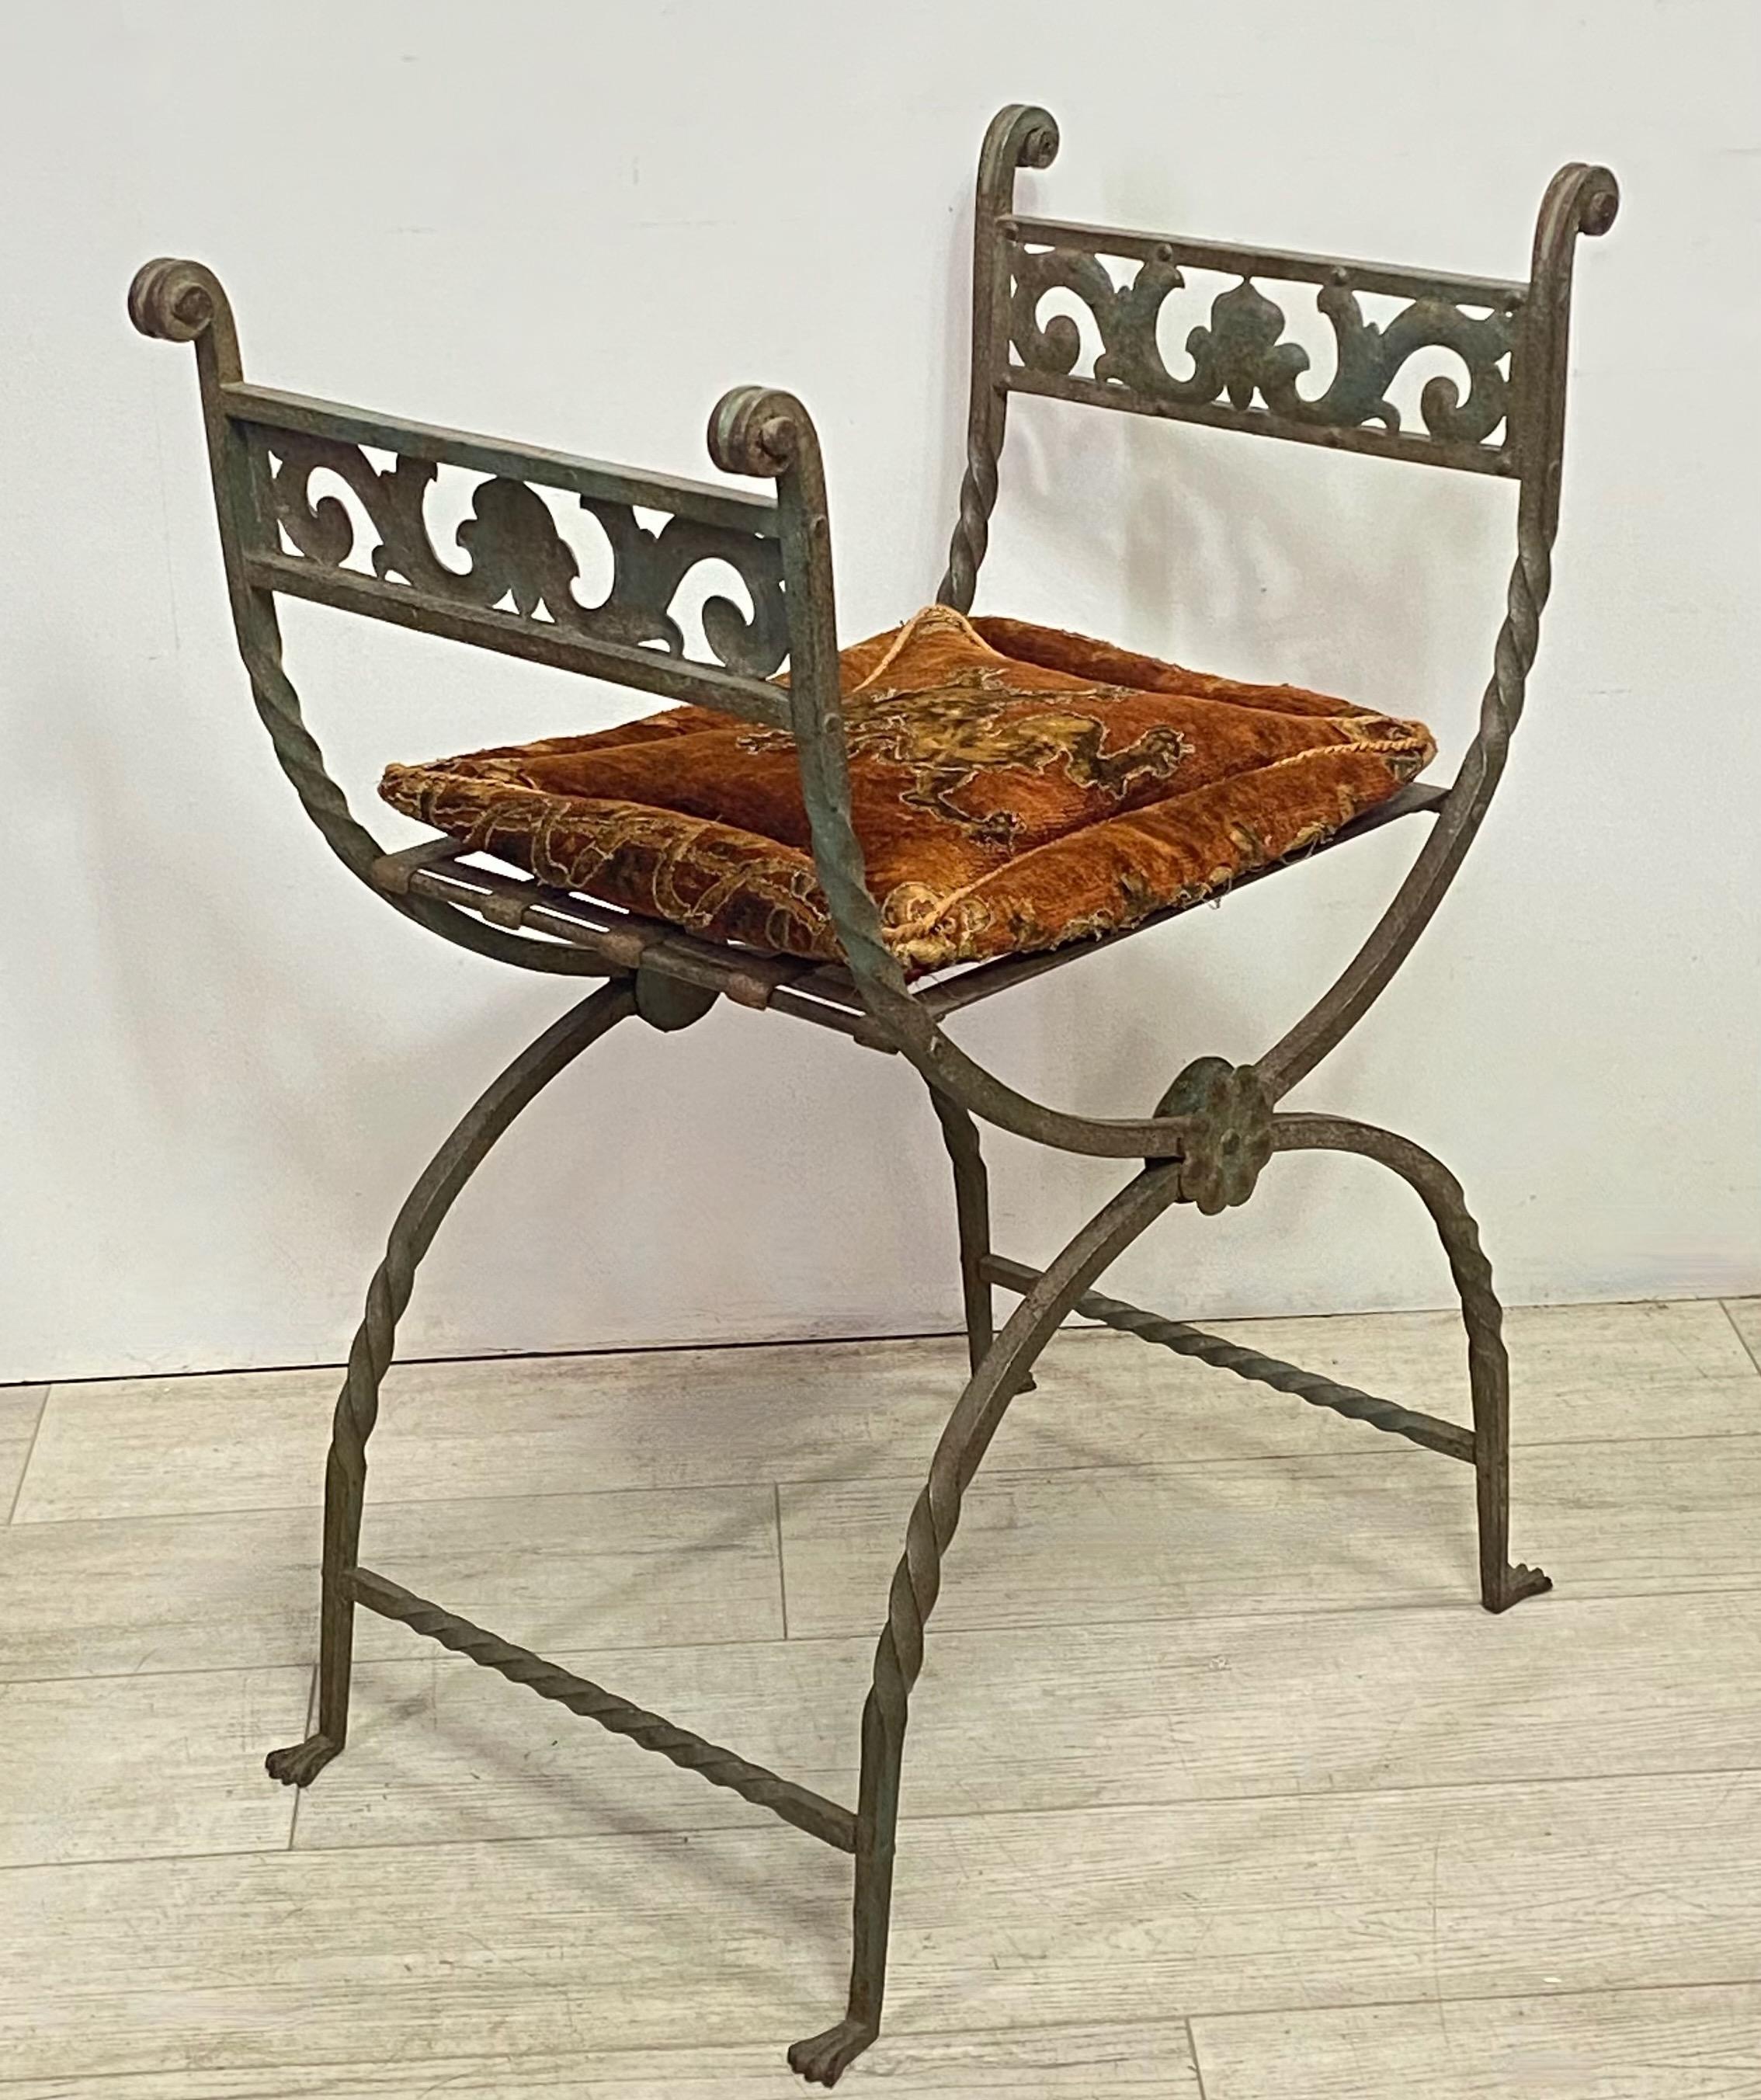 Hand-Crafted Antique Italian Wrought Iron Curule Style Stool or Chair, 19th Century